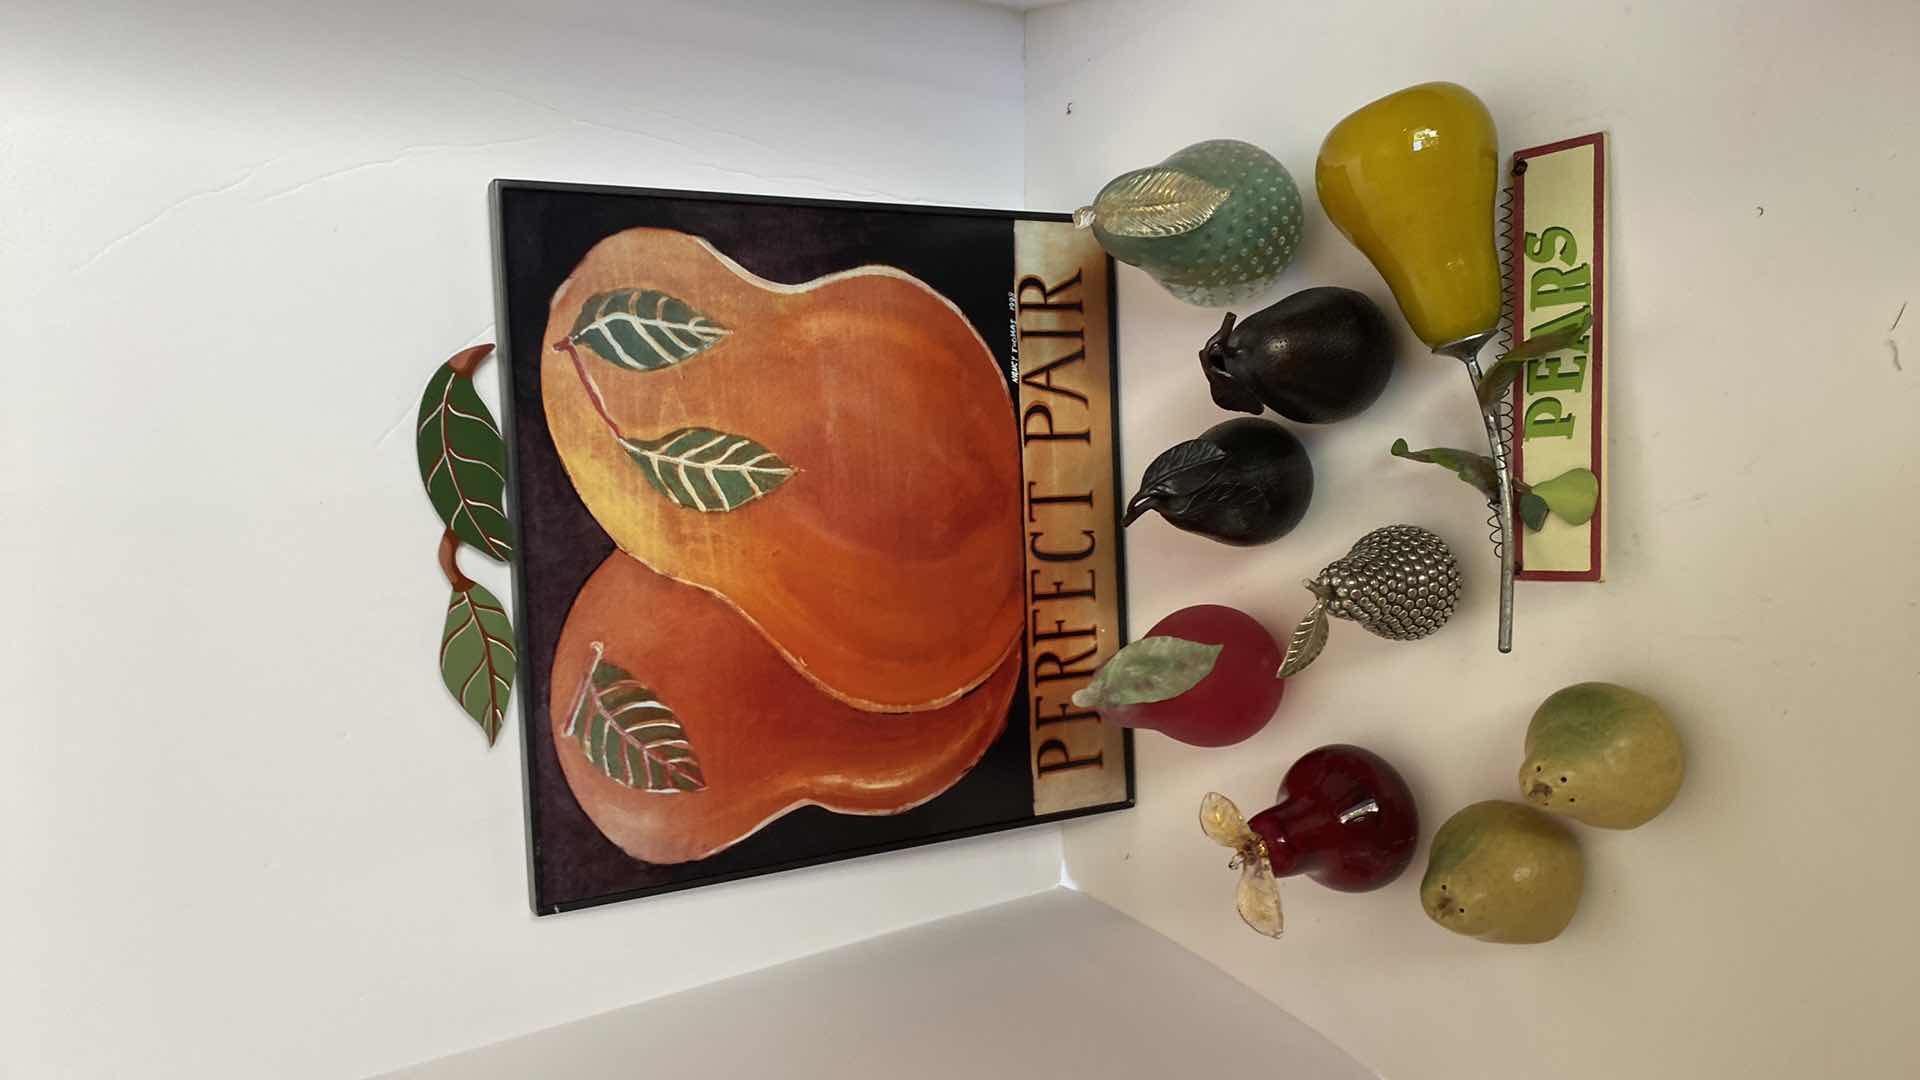 Photo 3 of PEAR COLLECTION - WALL ART 15 1/2“ x 15 1/2“ & CERAMIC AND GLASS PEARS